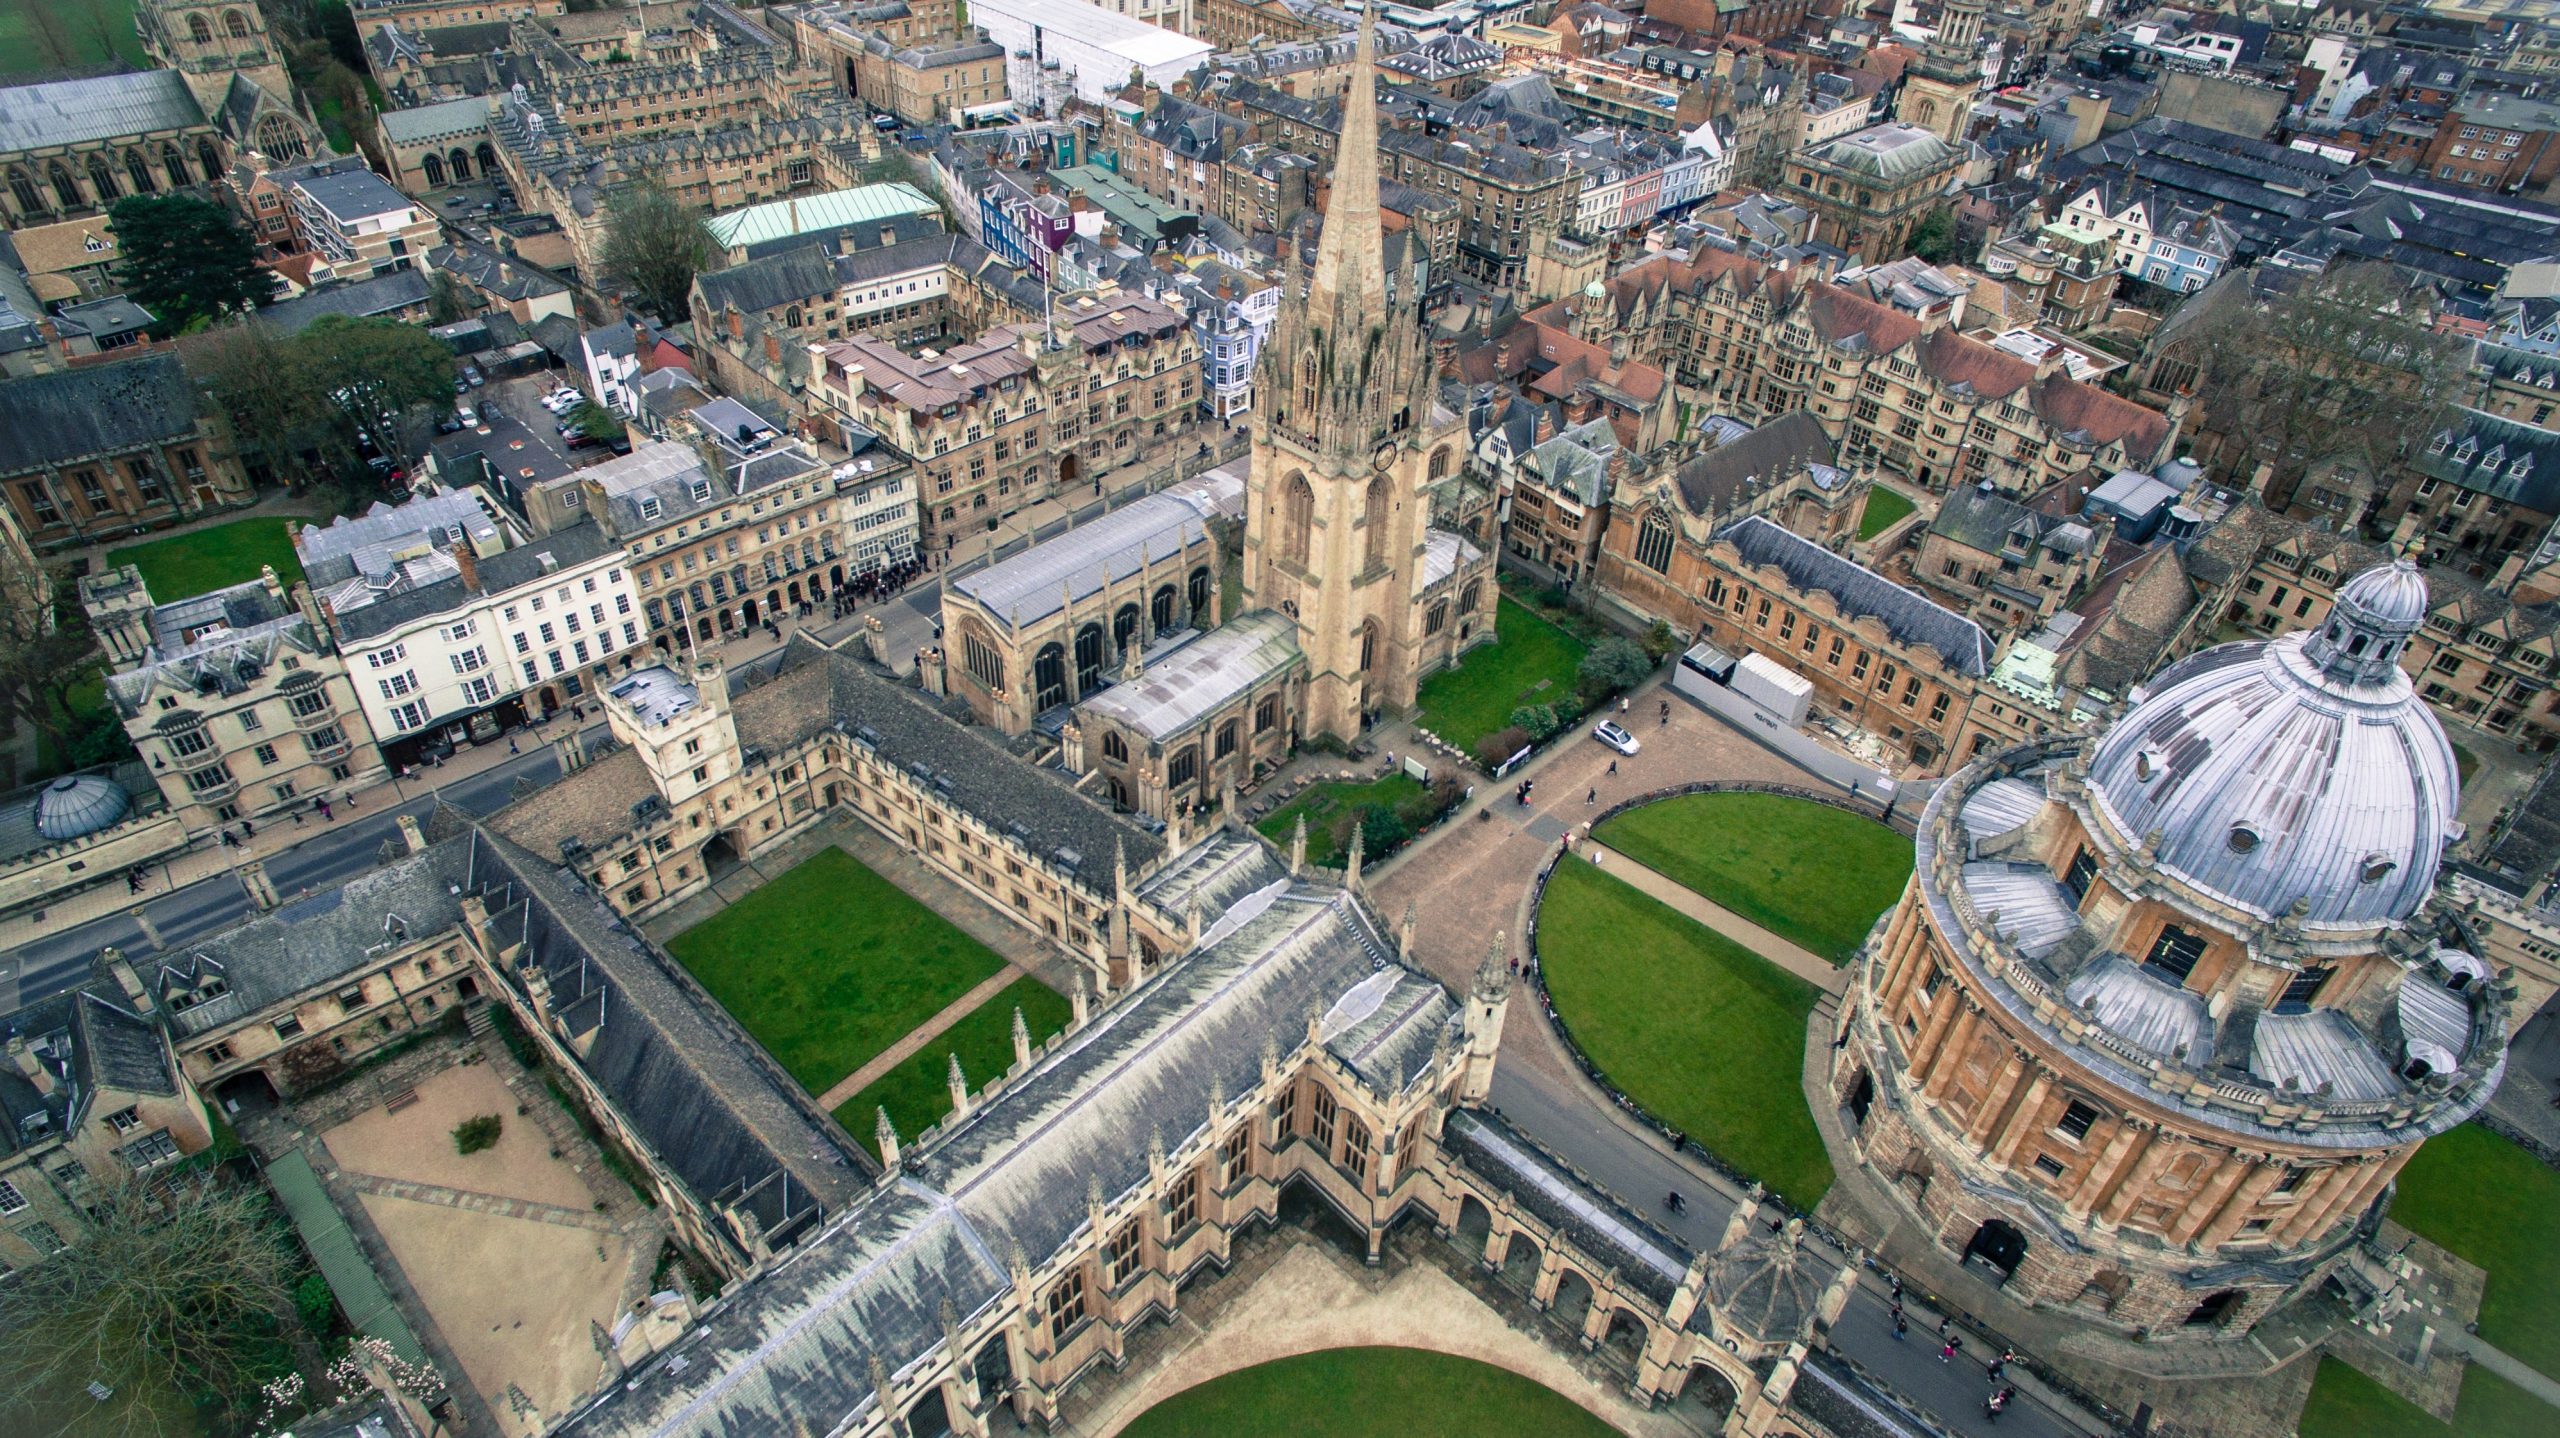 Aerial view of University of Oxford